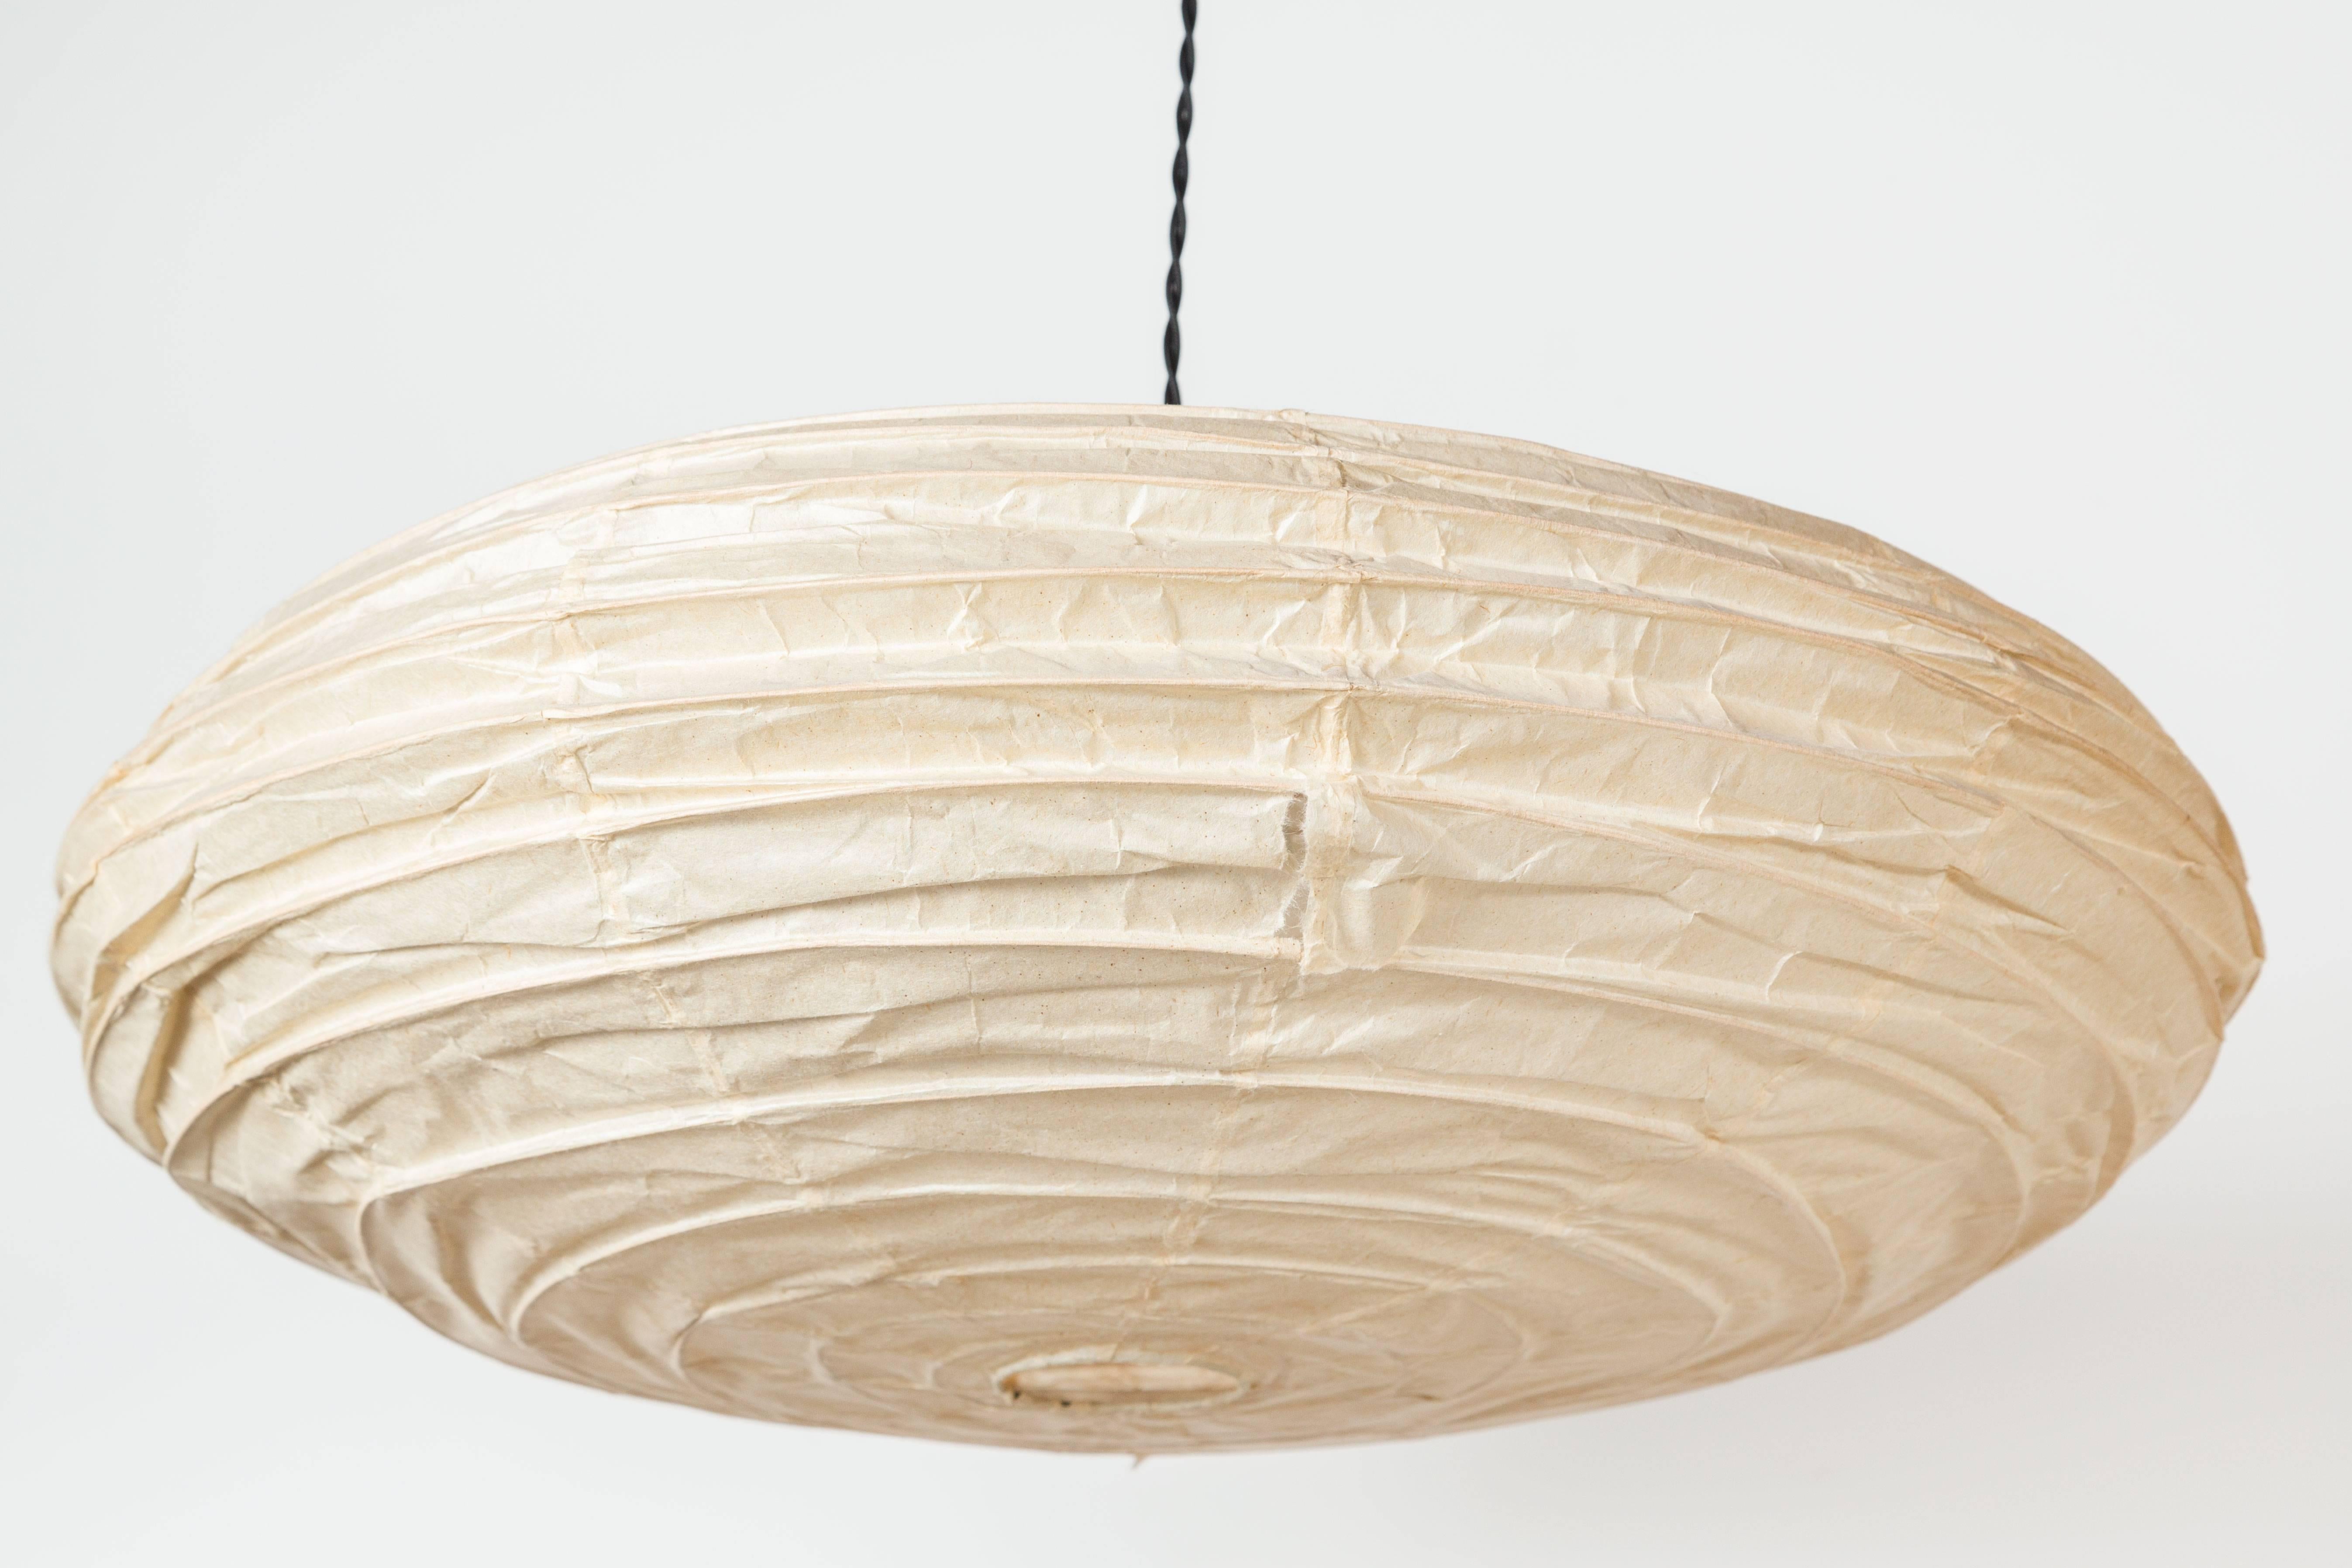 Bamboo Collection of Five Light Sculptures by Isamu Noguchi for Akari